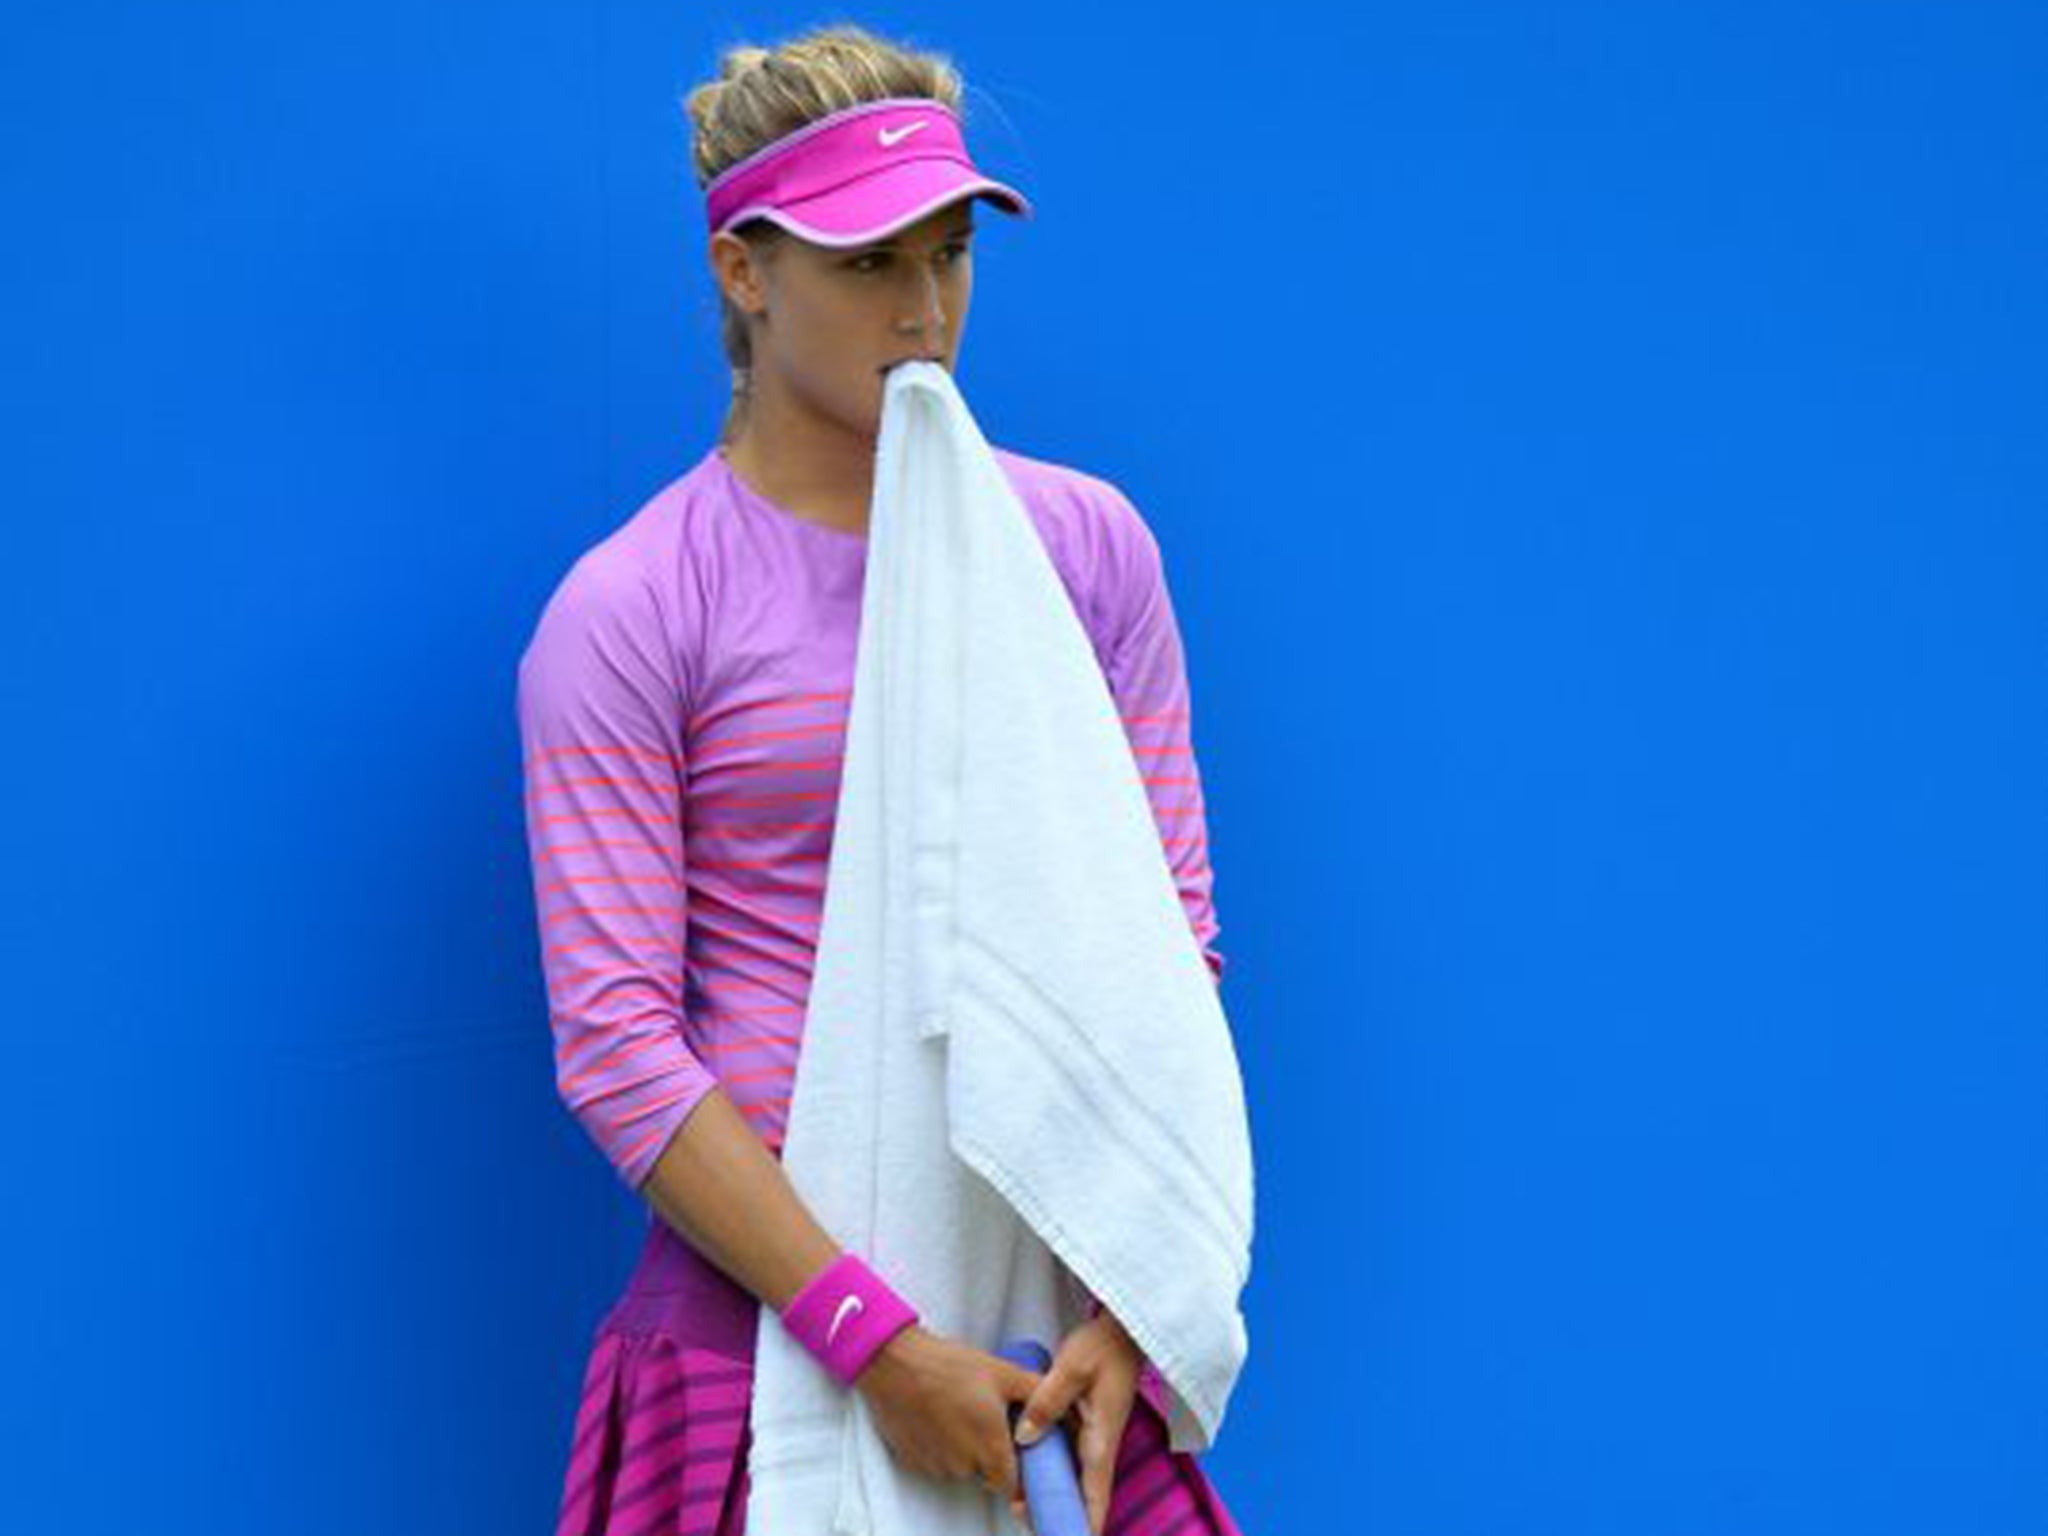 Eugenie Bouchard at Eastbourne last week contrasts starkly with last year’s Wimbledon finalist